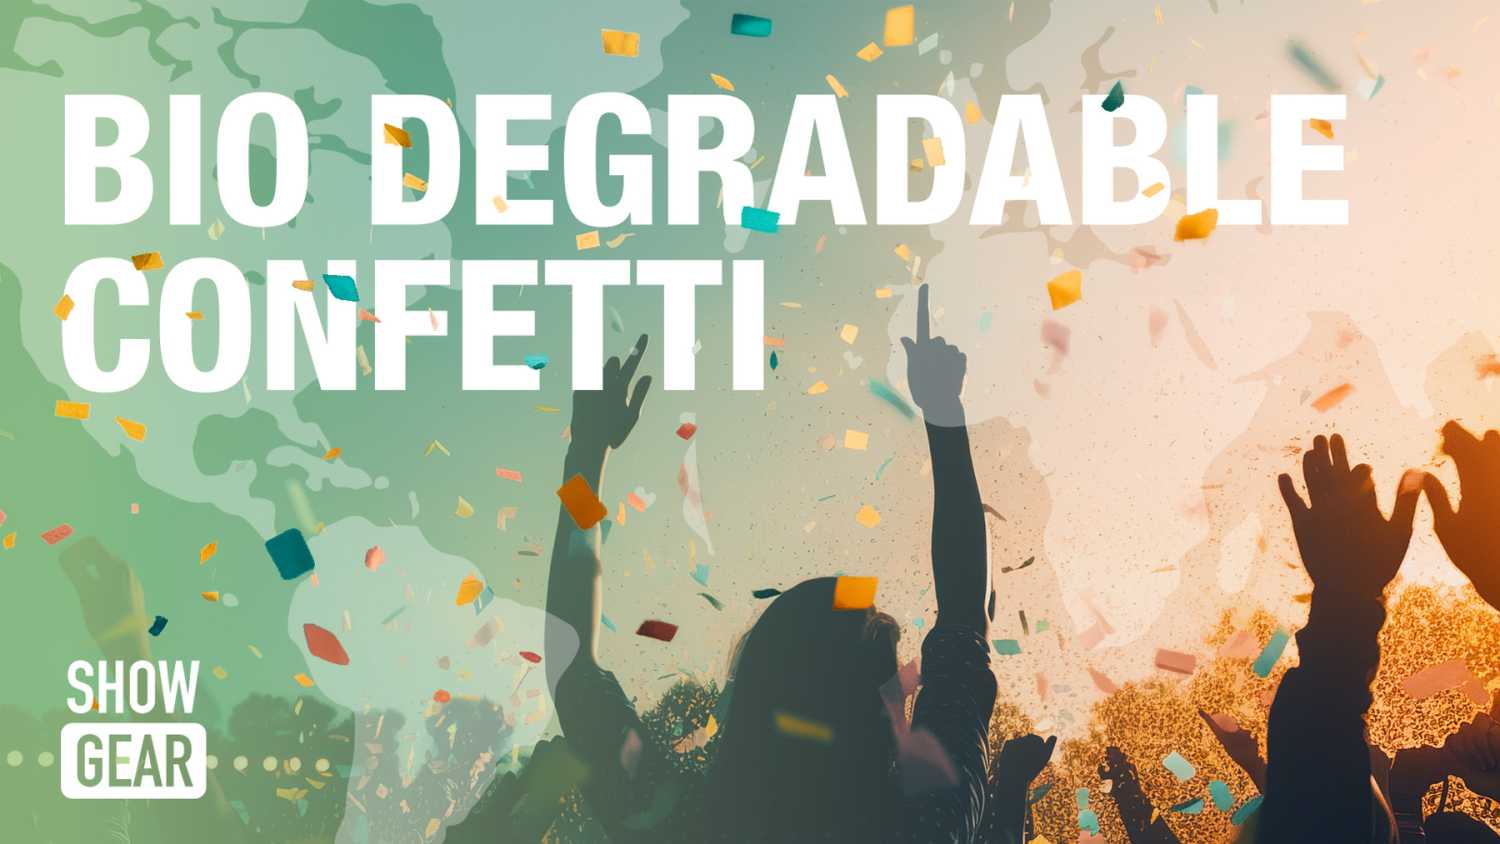 ‘Showgear’s biodegradable confetti allows revellers to celebrate with a clear conscience’